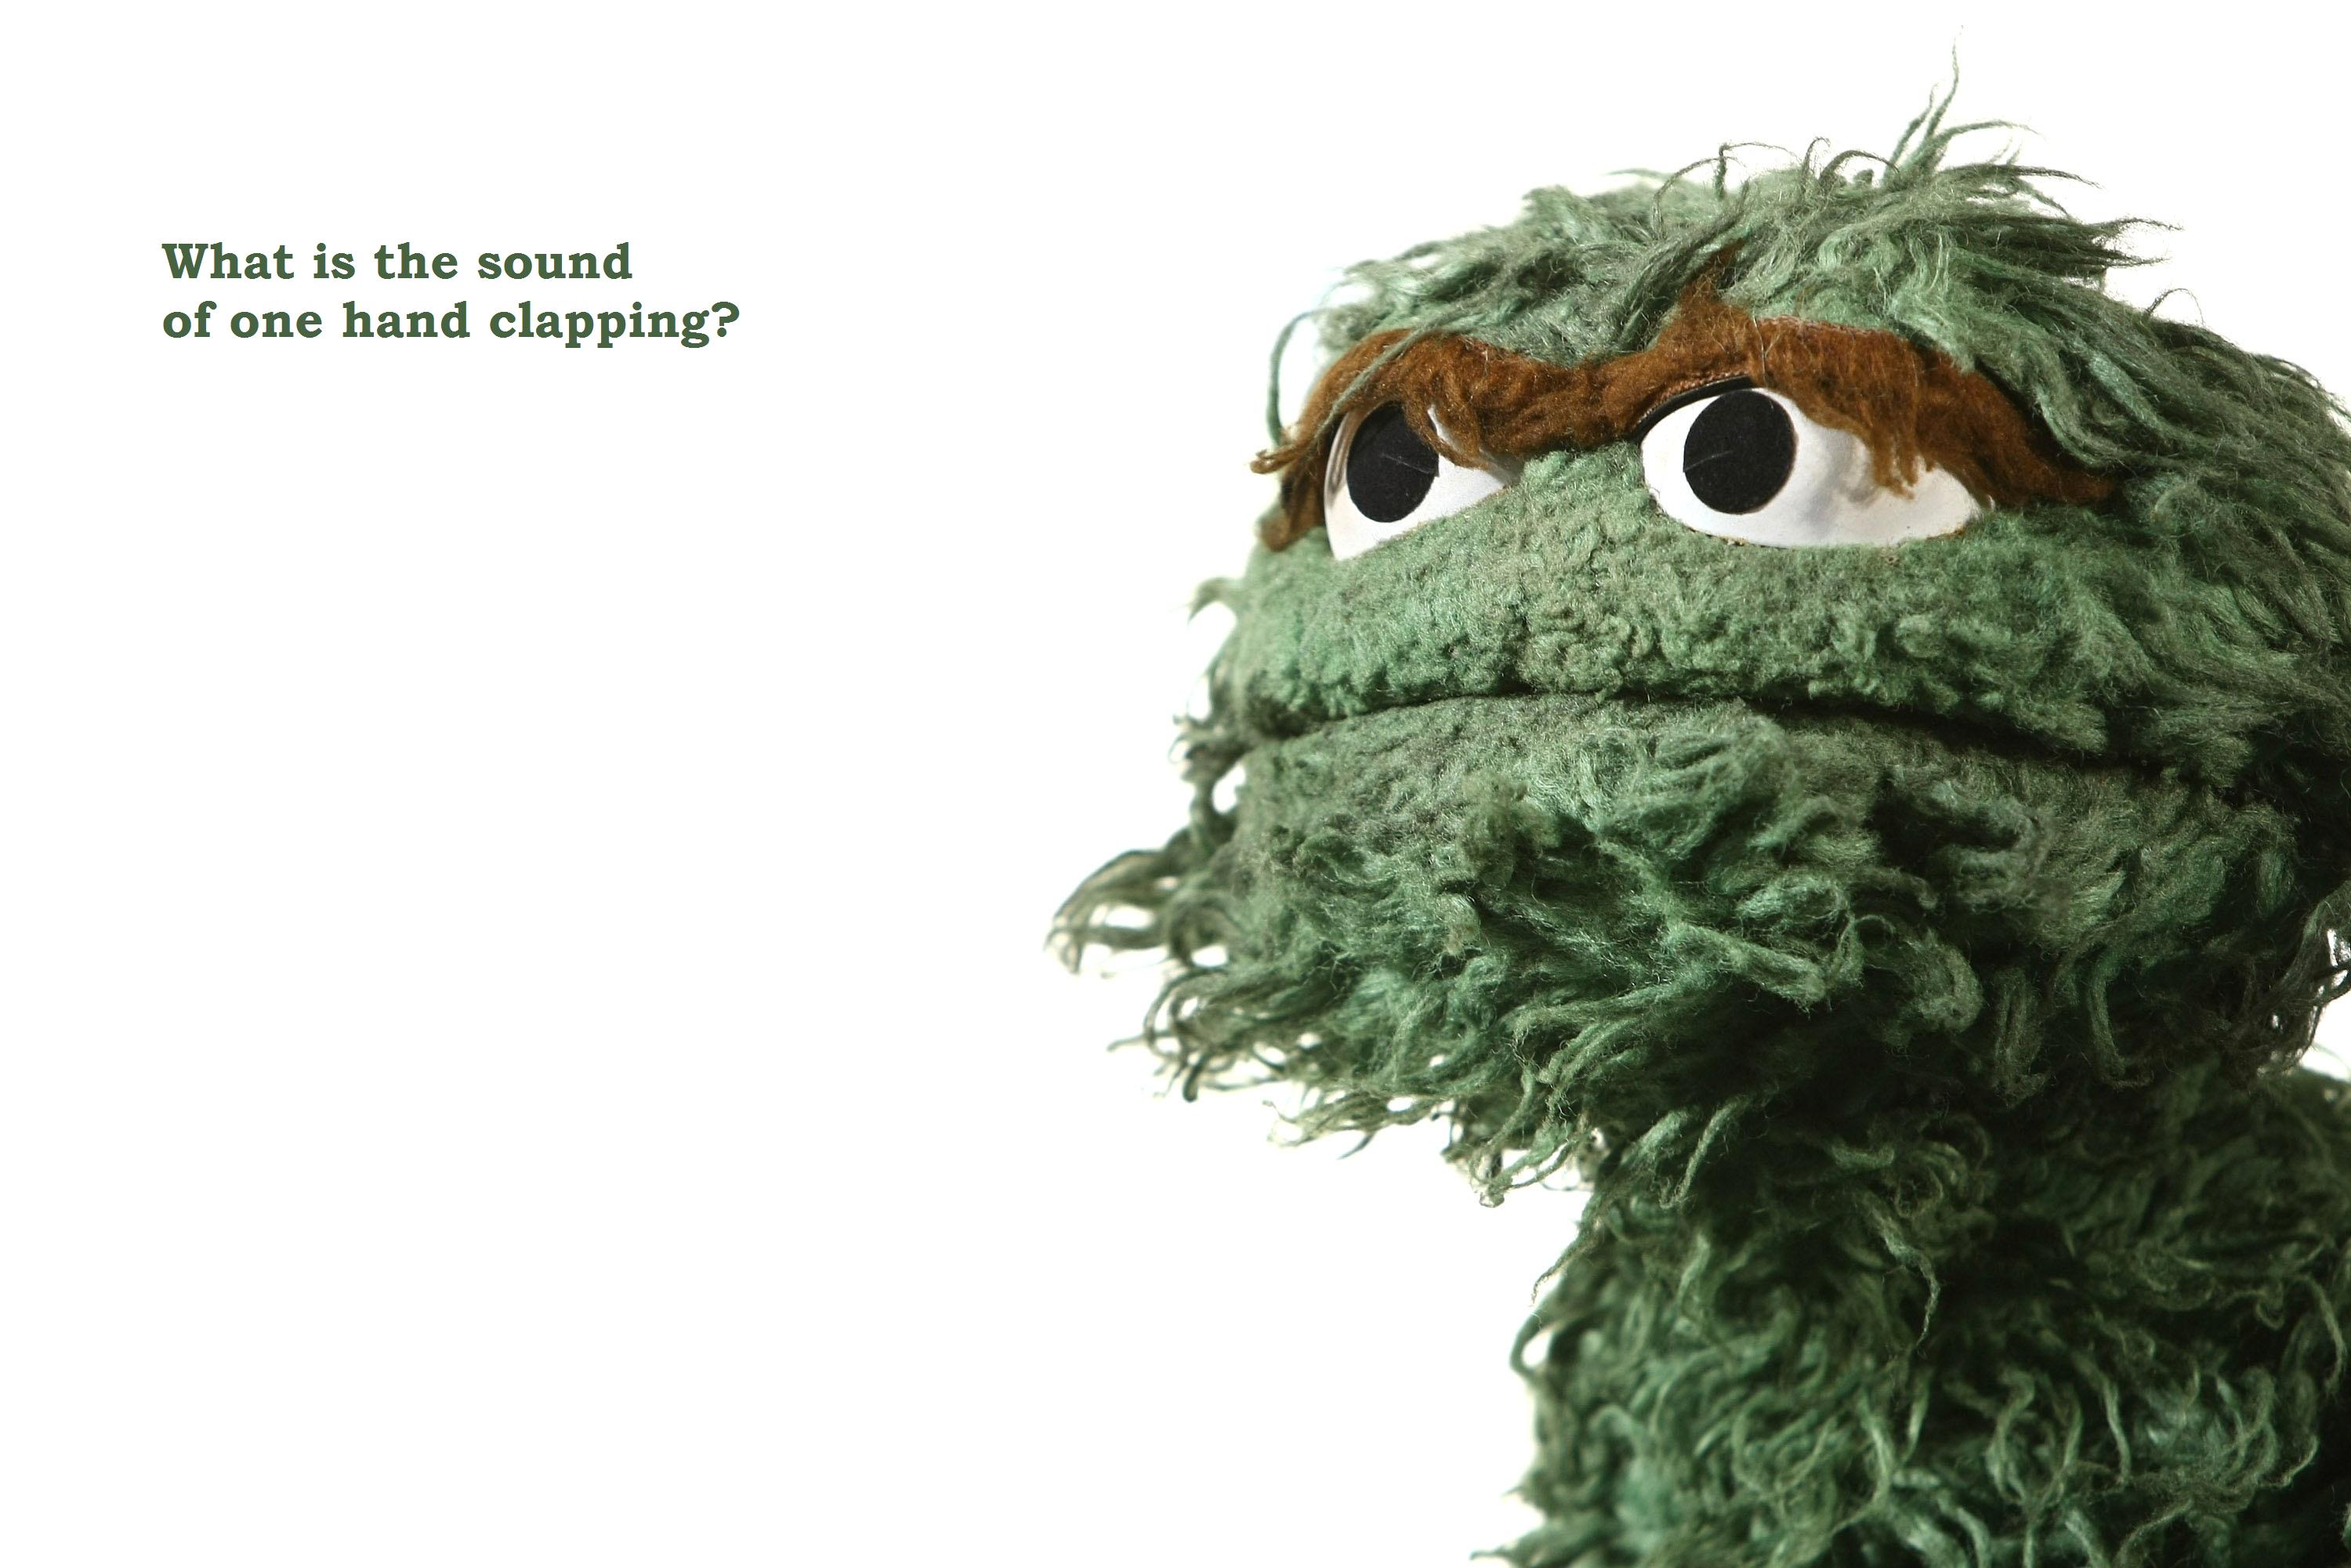 Oscar the Grouch in a vibrant and playful desktop wallpaper.